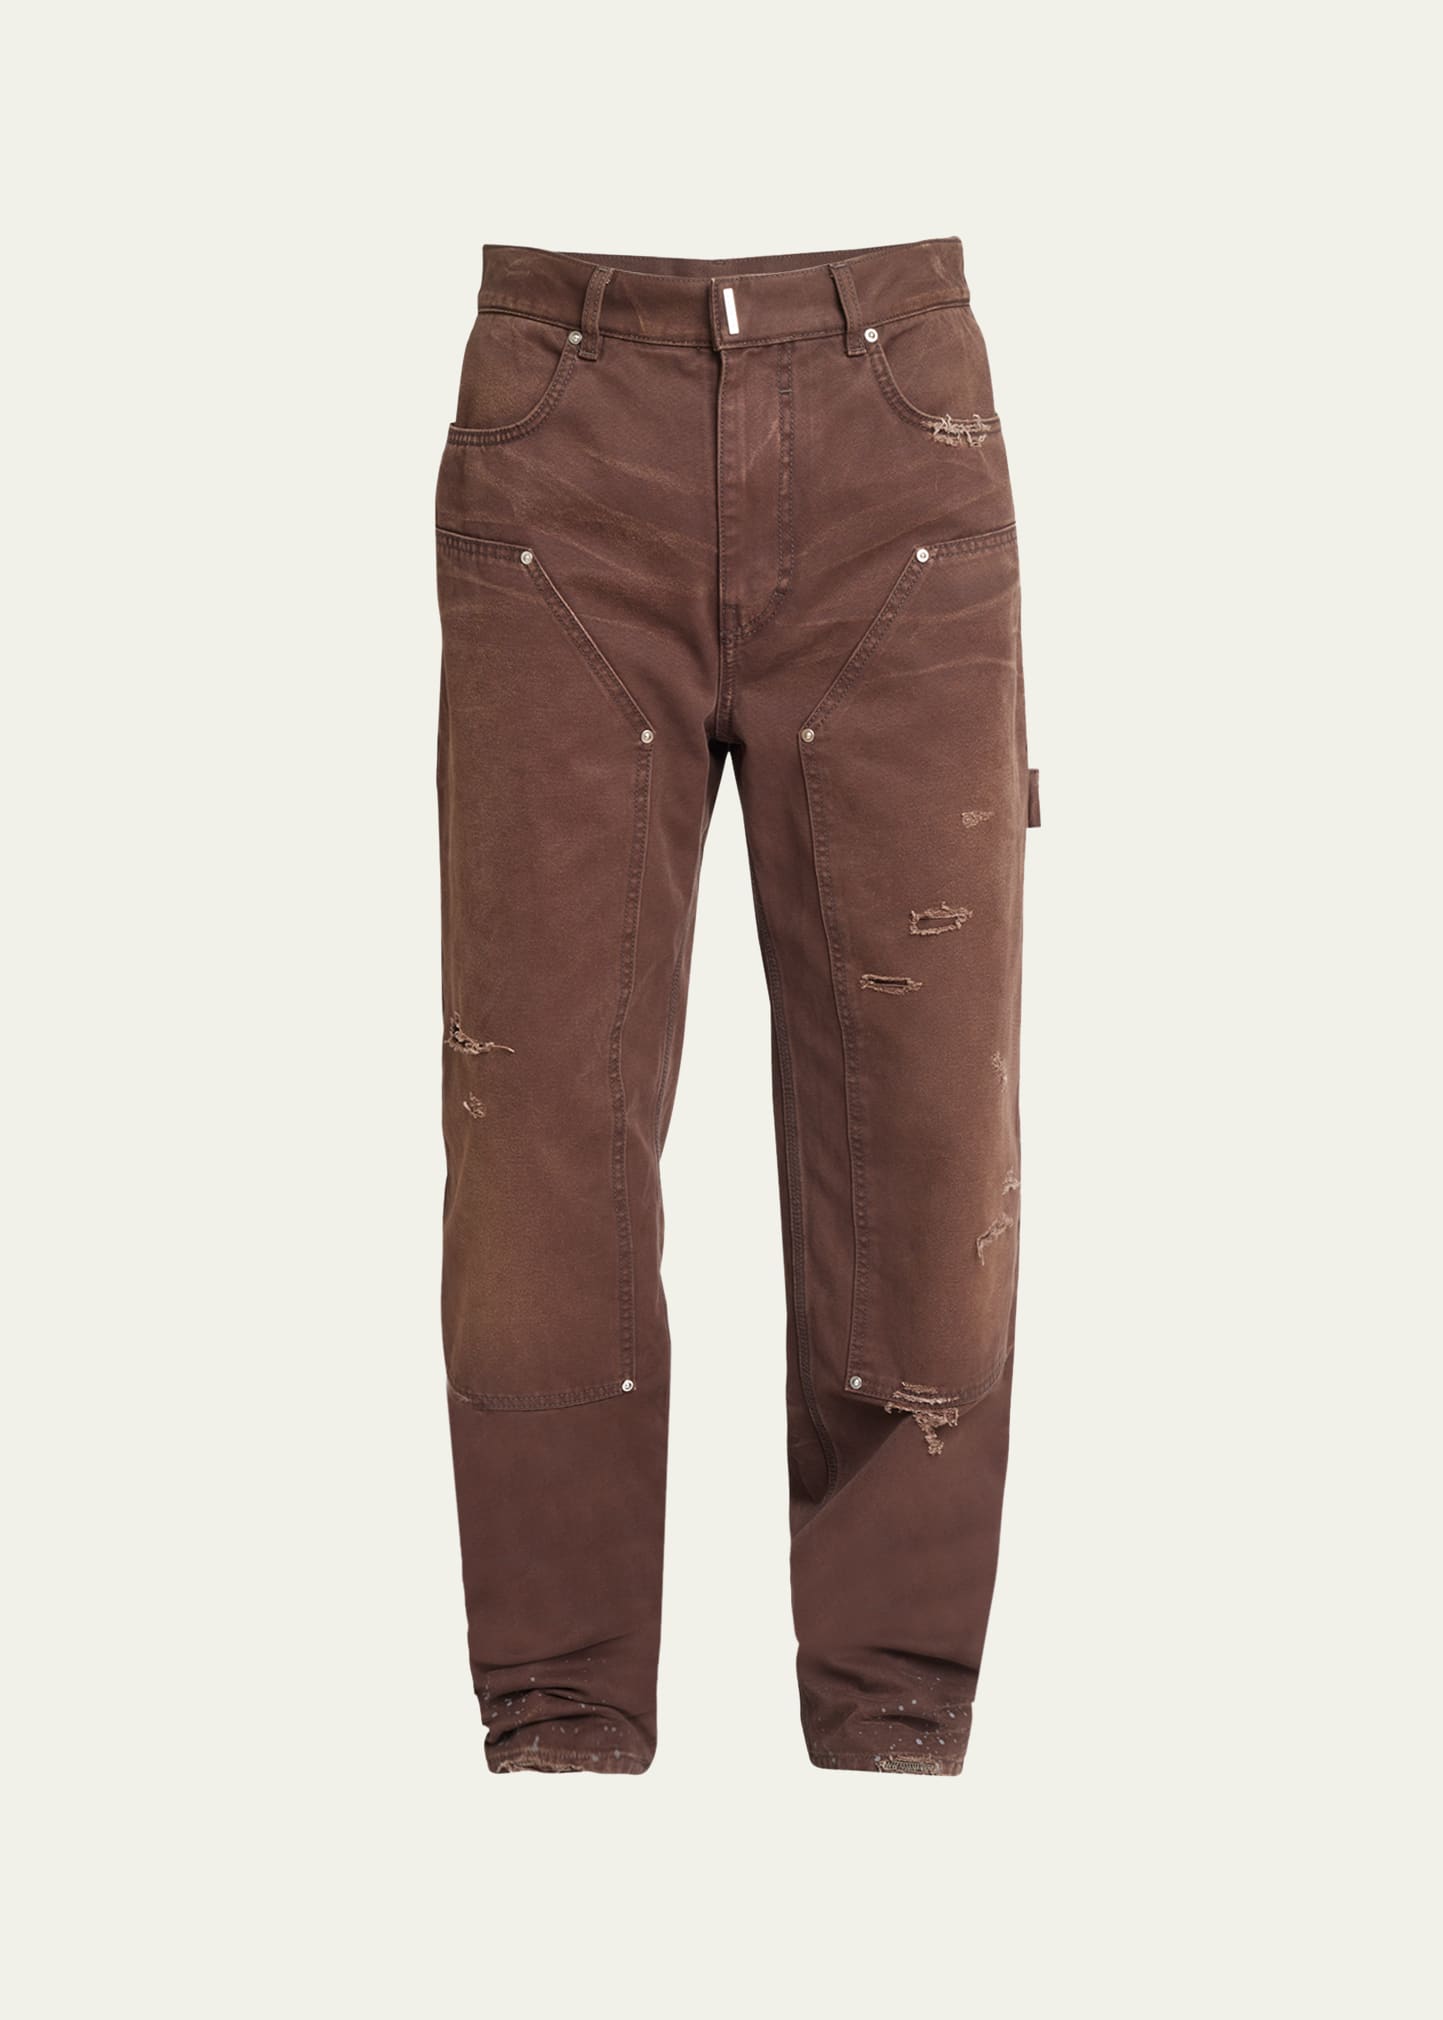 Givenchy Men's Flannel-lined Distressed Carpenter Pants In Dark Brown